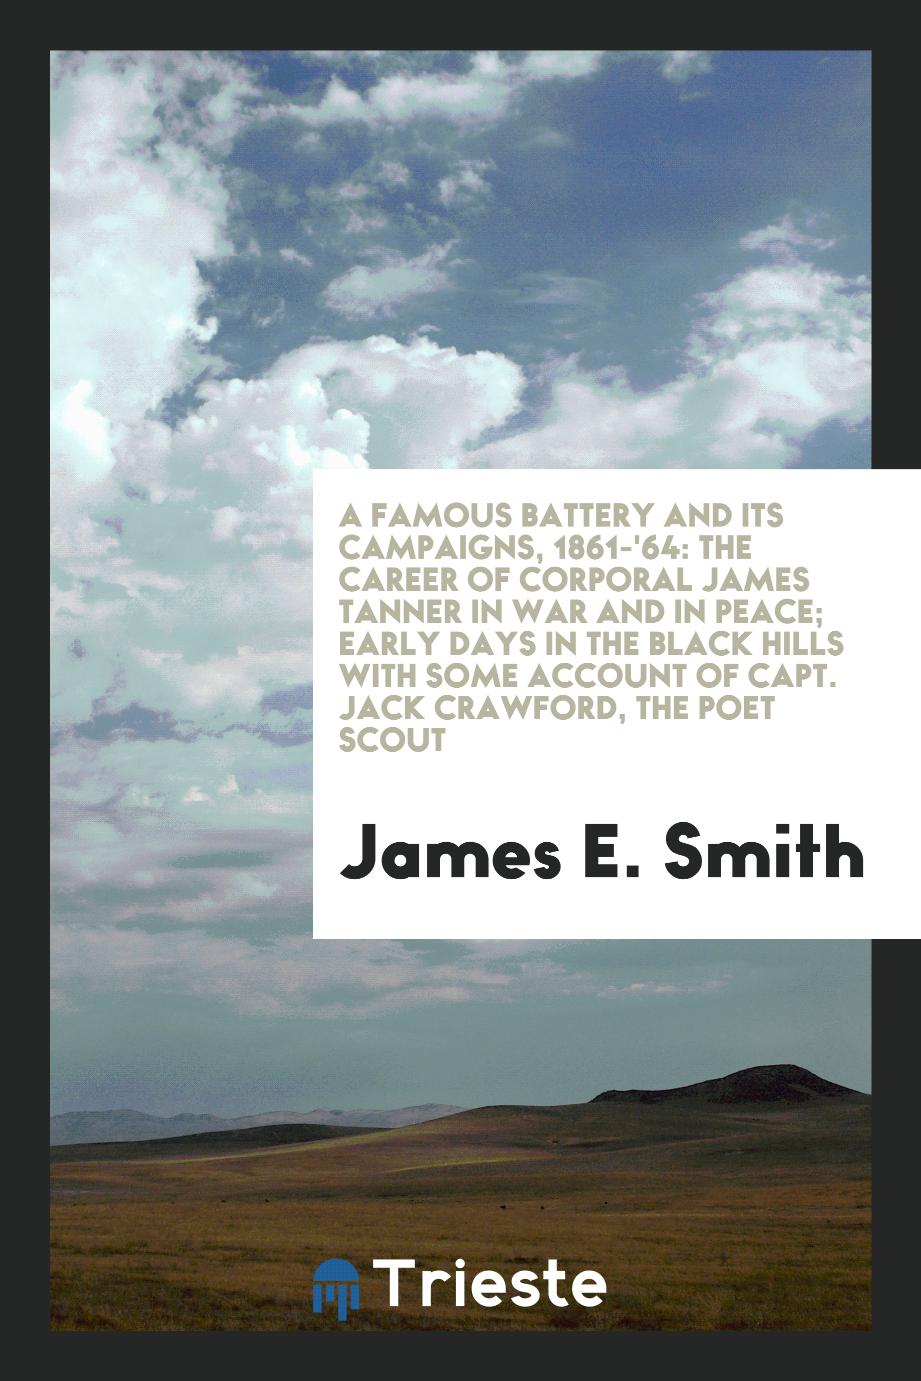 A famous battery and its campaigns, 1861-'64: The career of Corporal James Tanner in war and in peace; early days in the Black Hills with some account of Capt. Jack Crawford, the poet scout